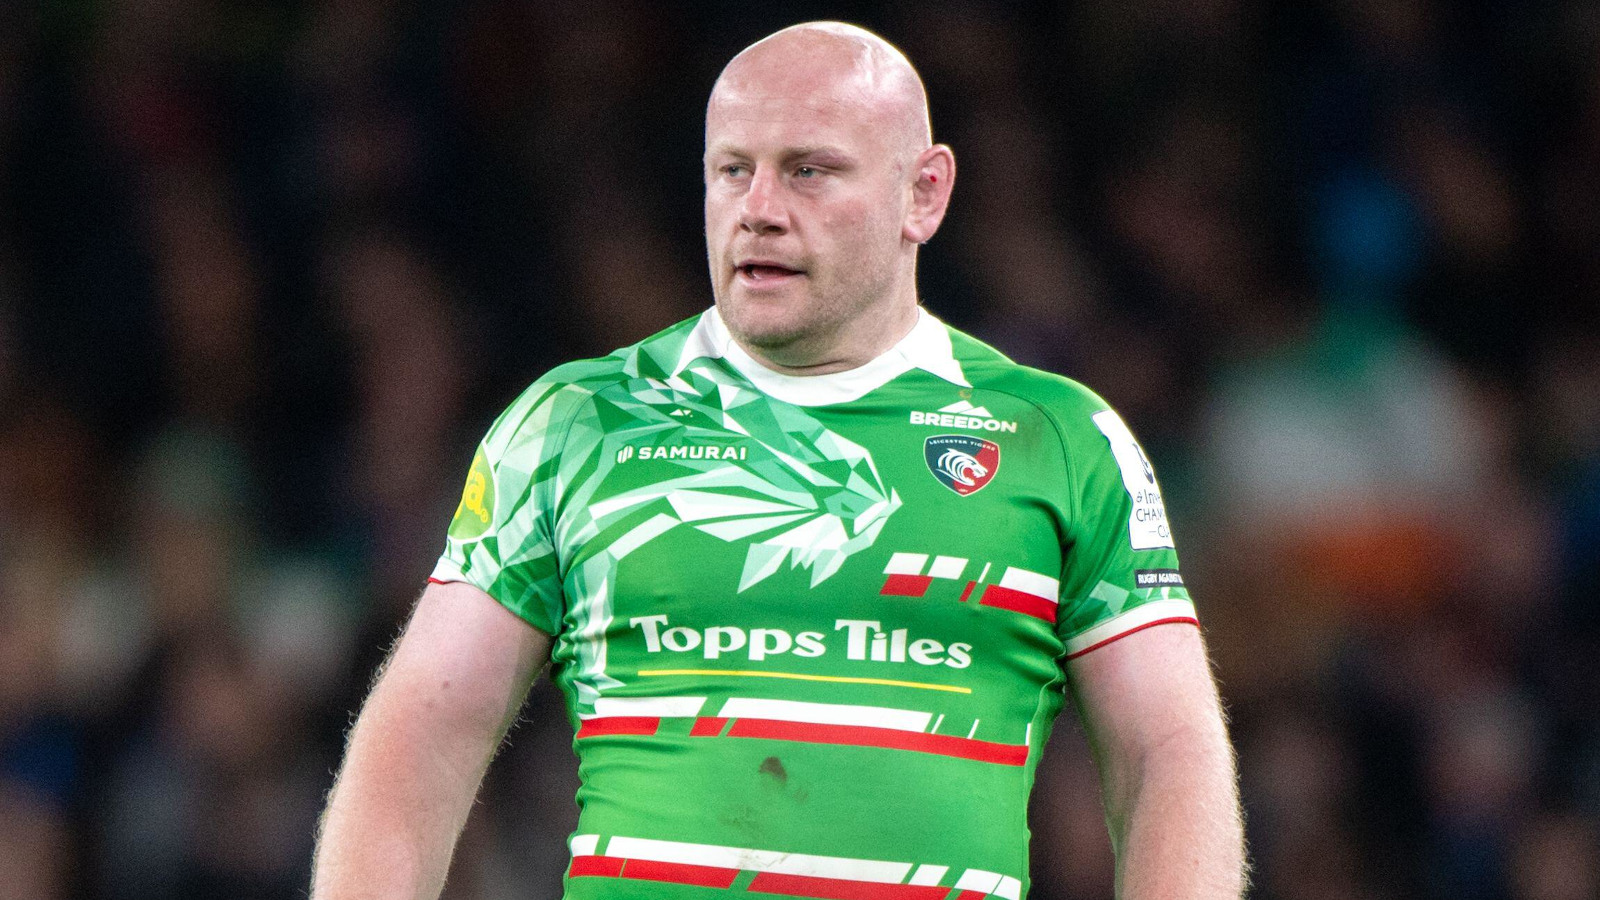 dan cole reaches ‘truly remarkable’ milestone in east midlands derby while england duo return for harlequins